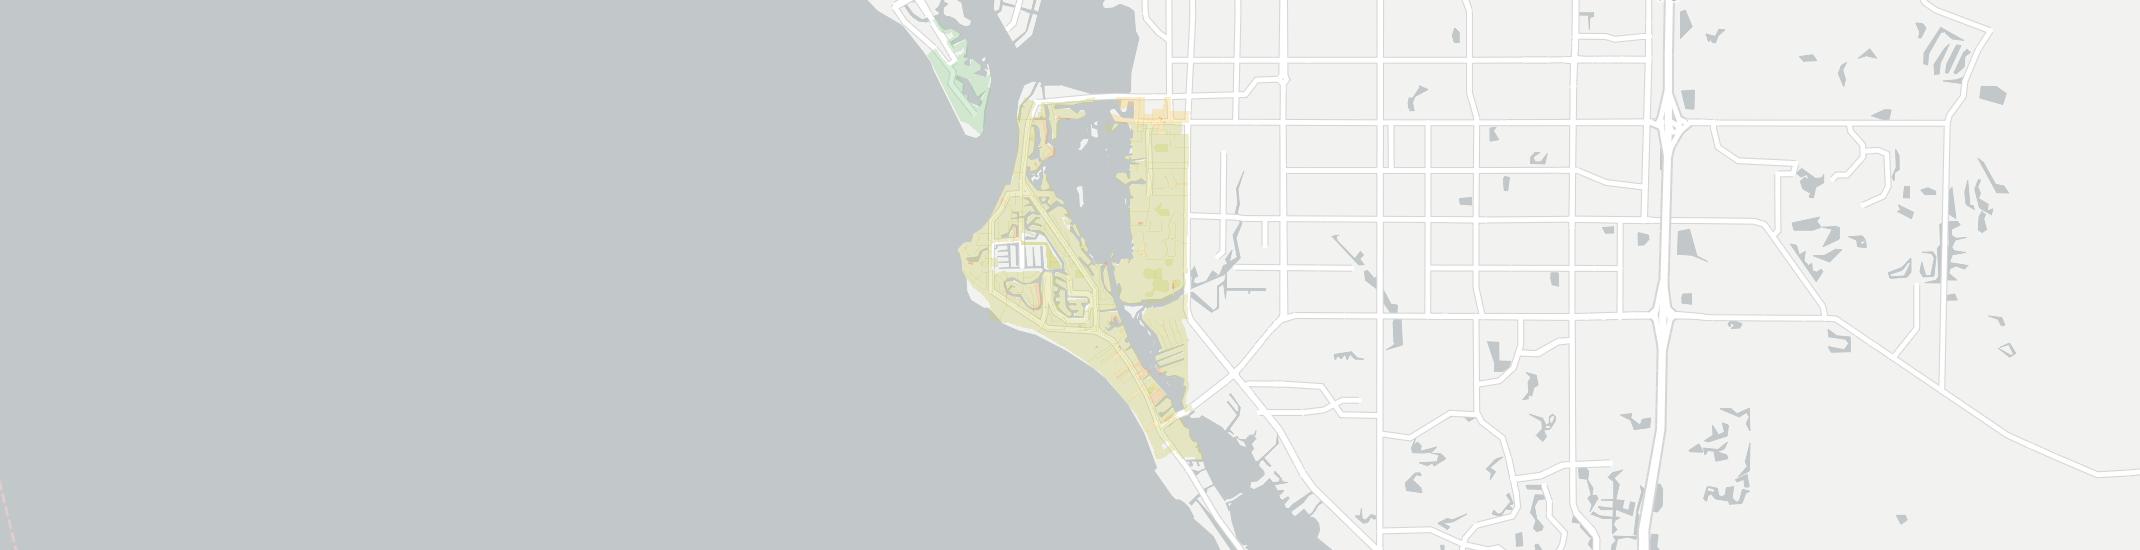 Siesta Key Internet Competition Map. Click for interactive map.